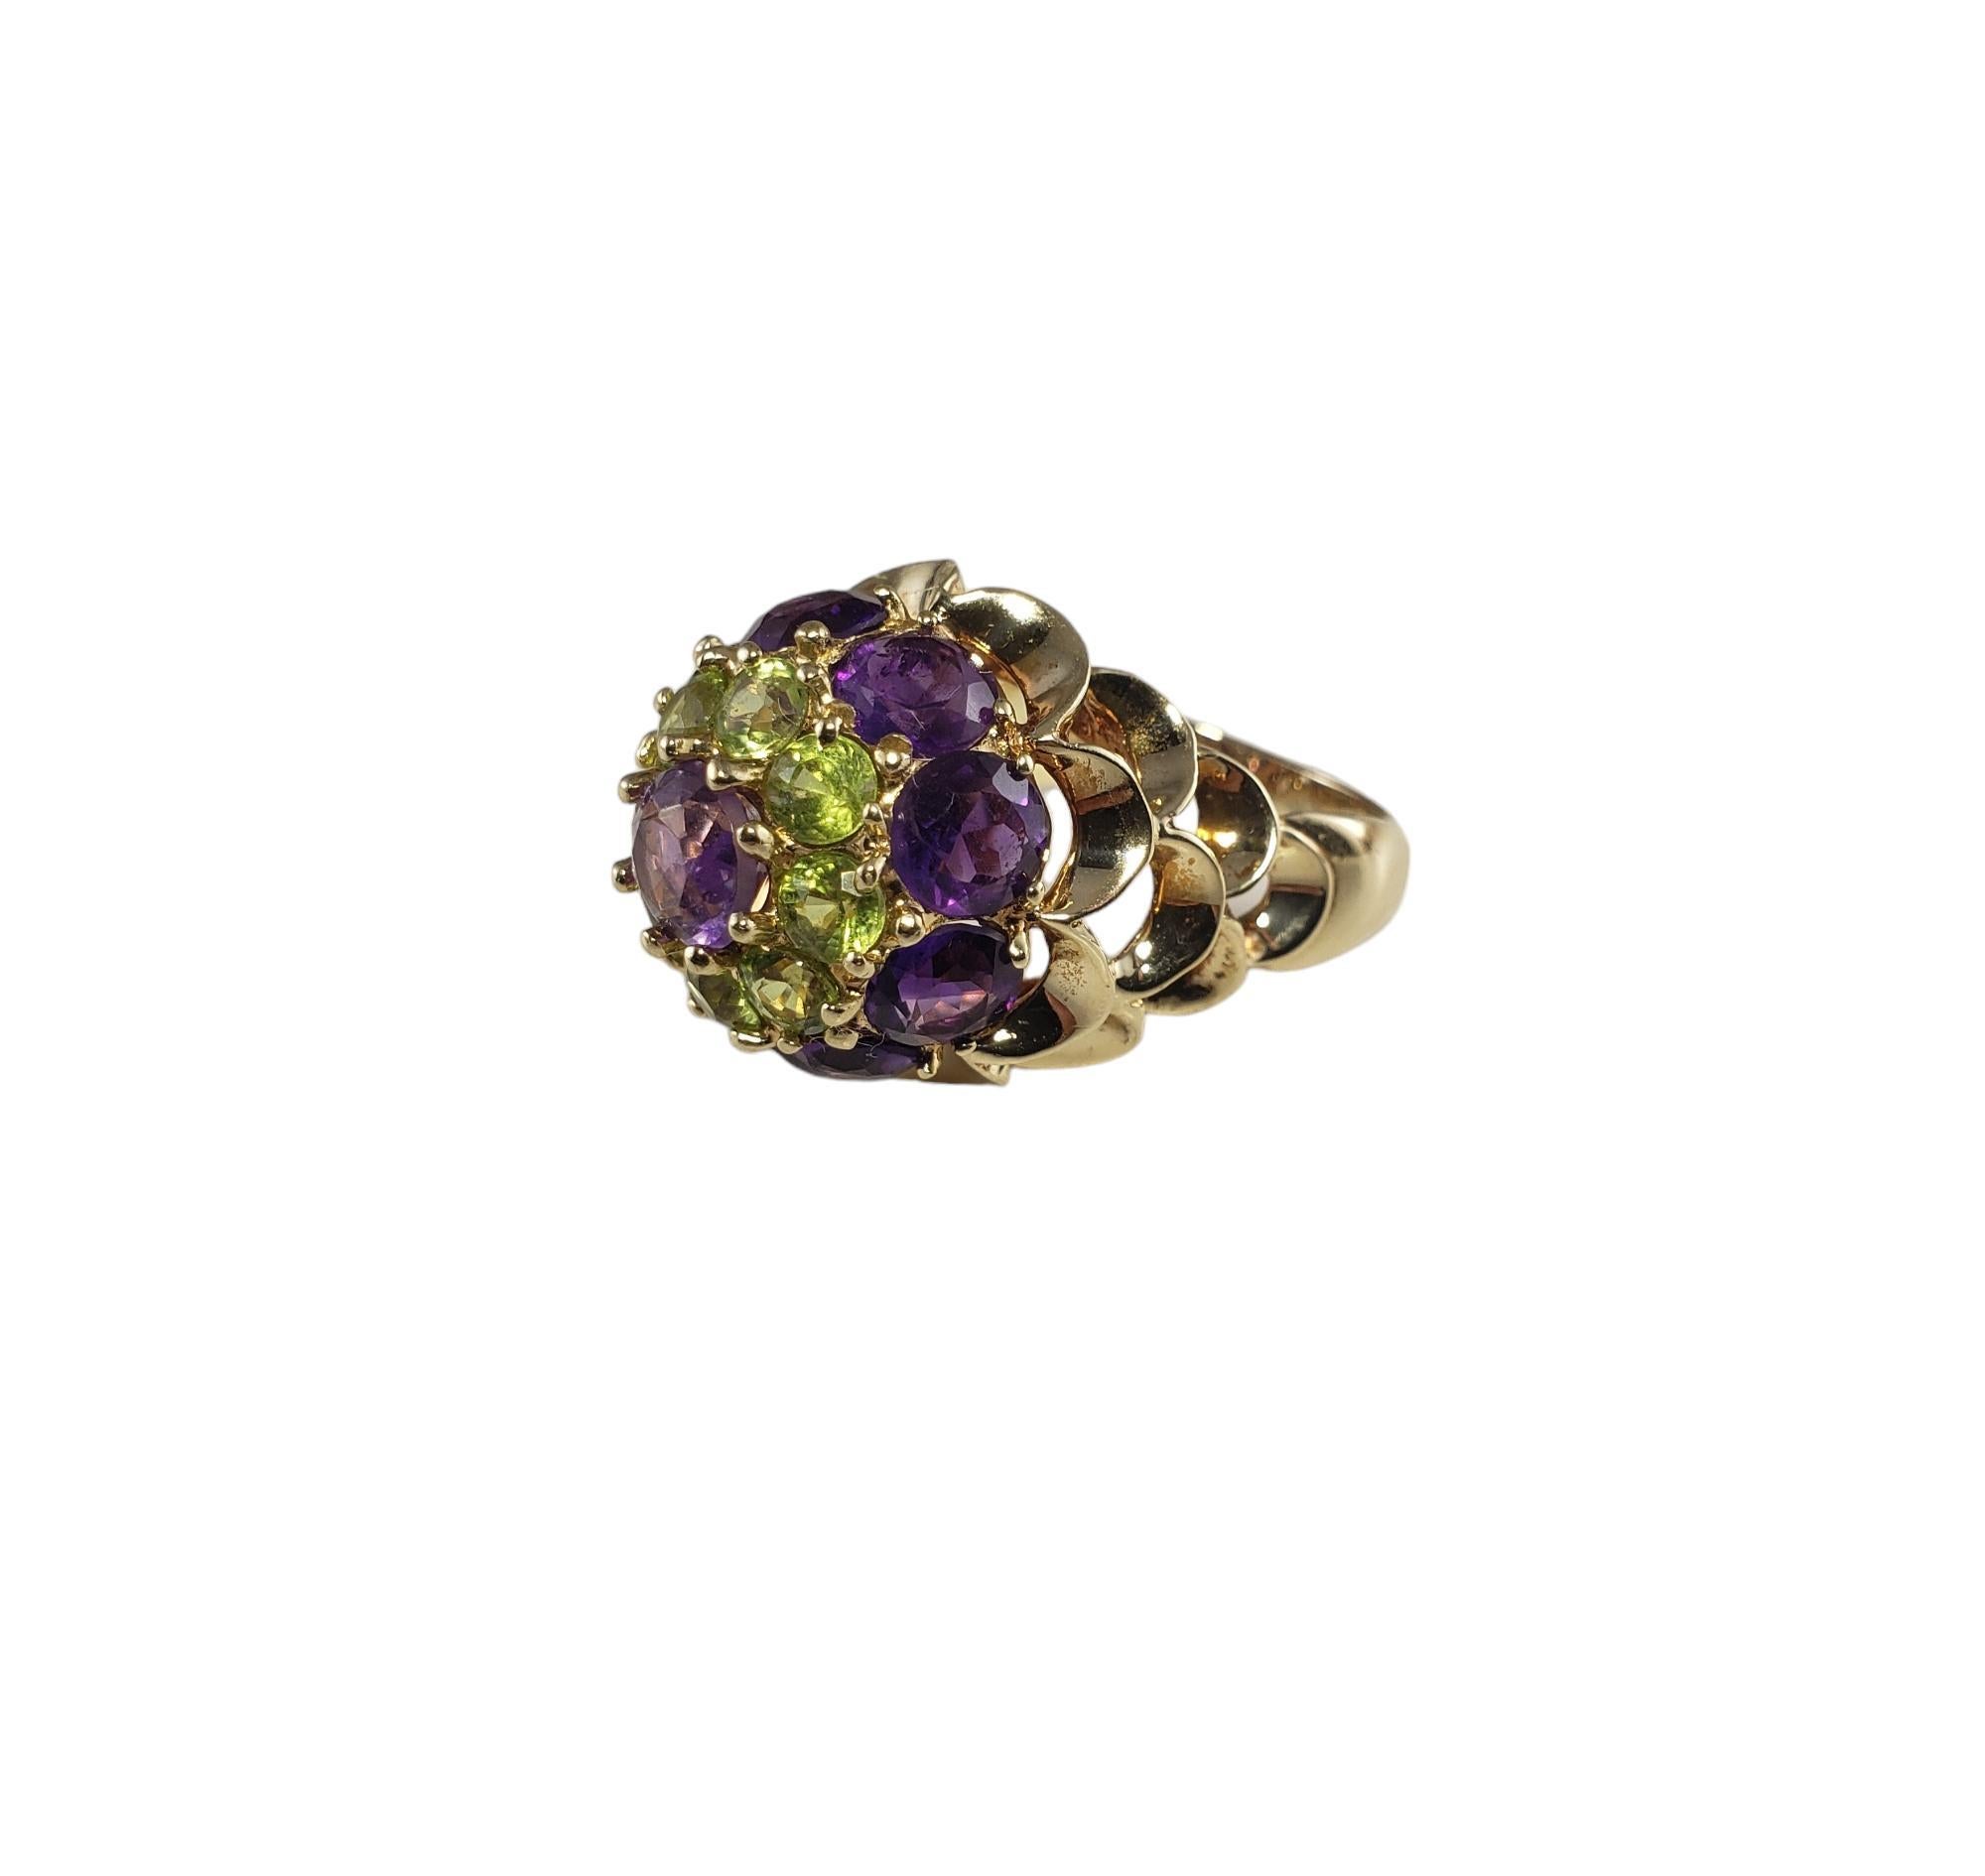 14K Yellow Gold Amethyst & Peridot Ring Size 7 #16327 In Good Condition For Sale In Washington Depot, CT